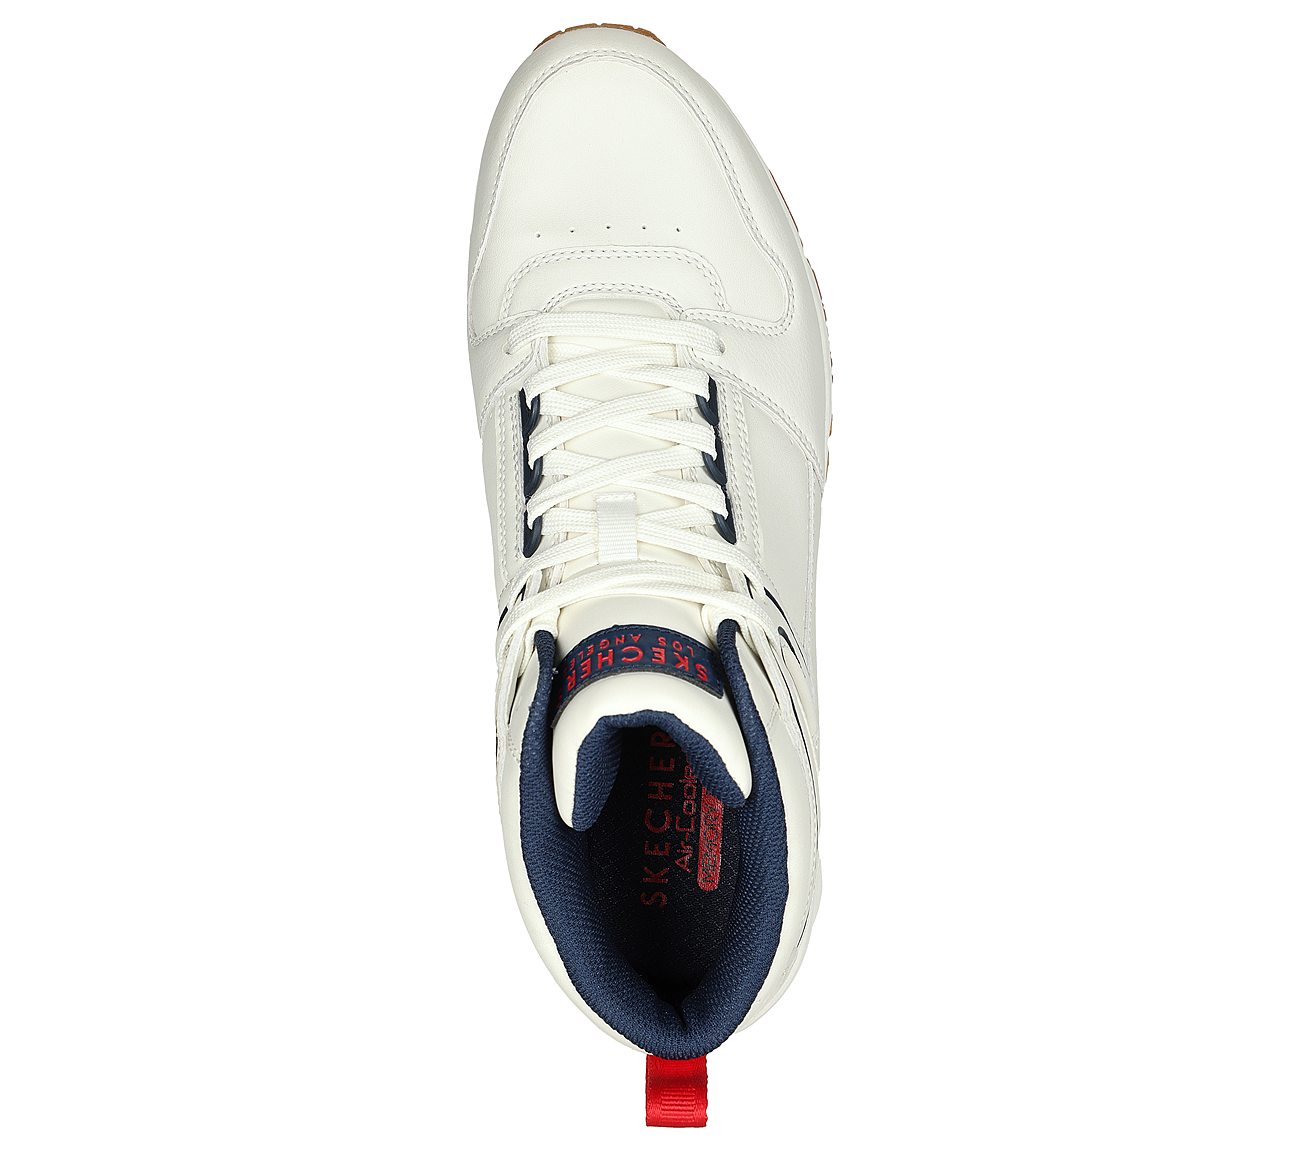 UNO - KEEP CLOSE, WHITE/NAVY/RED Footwear Top View